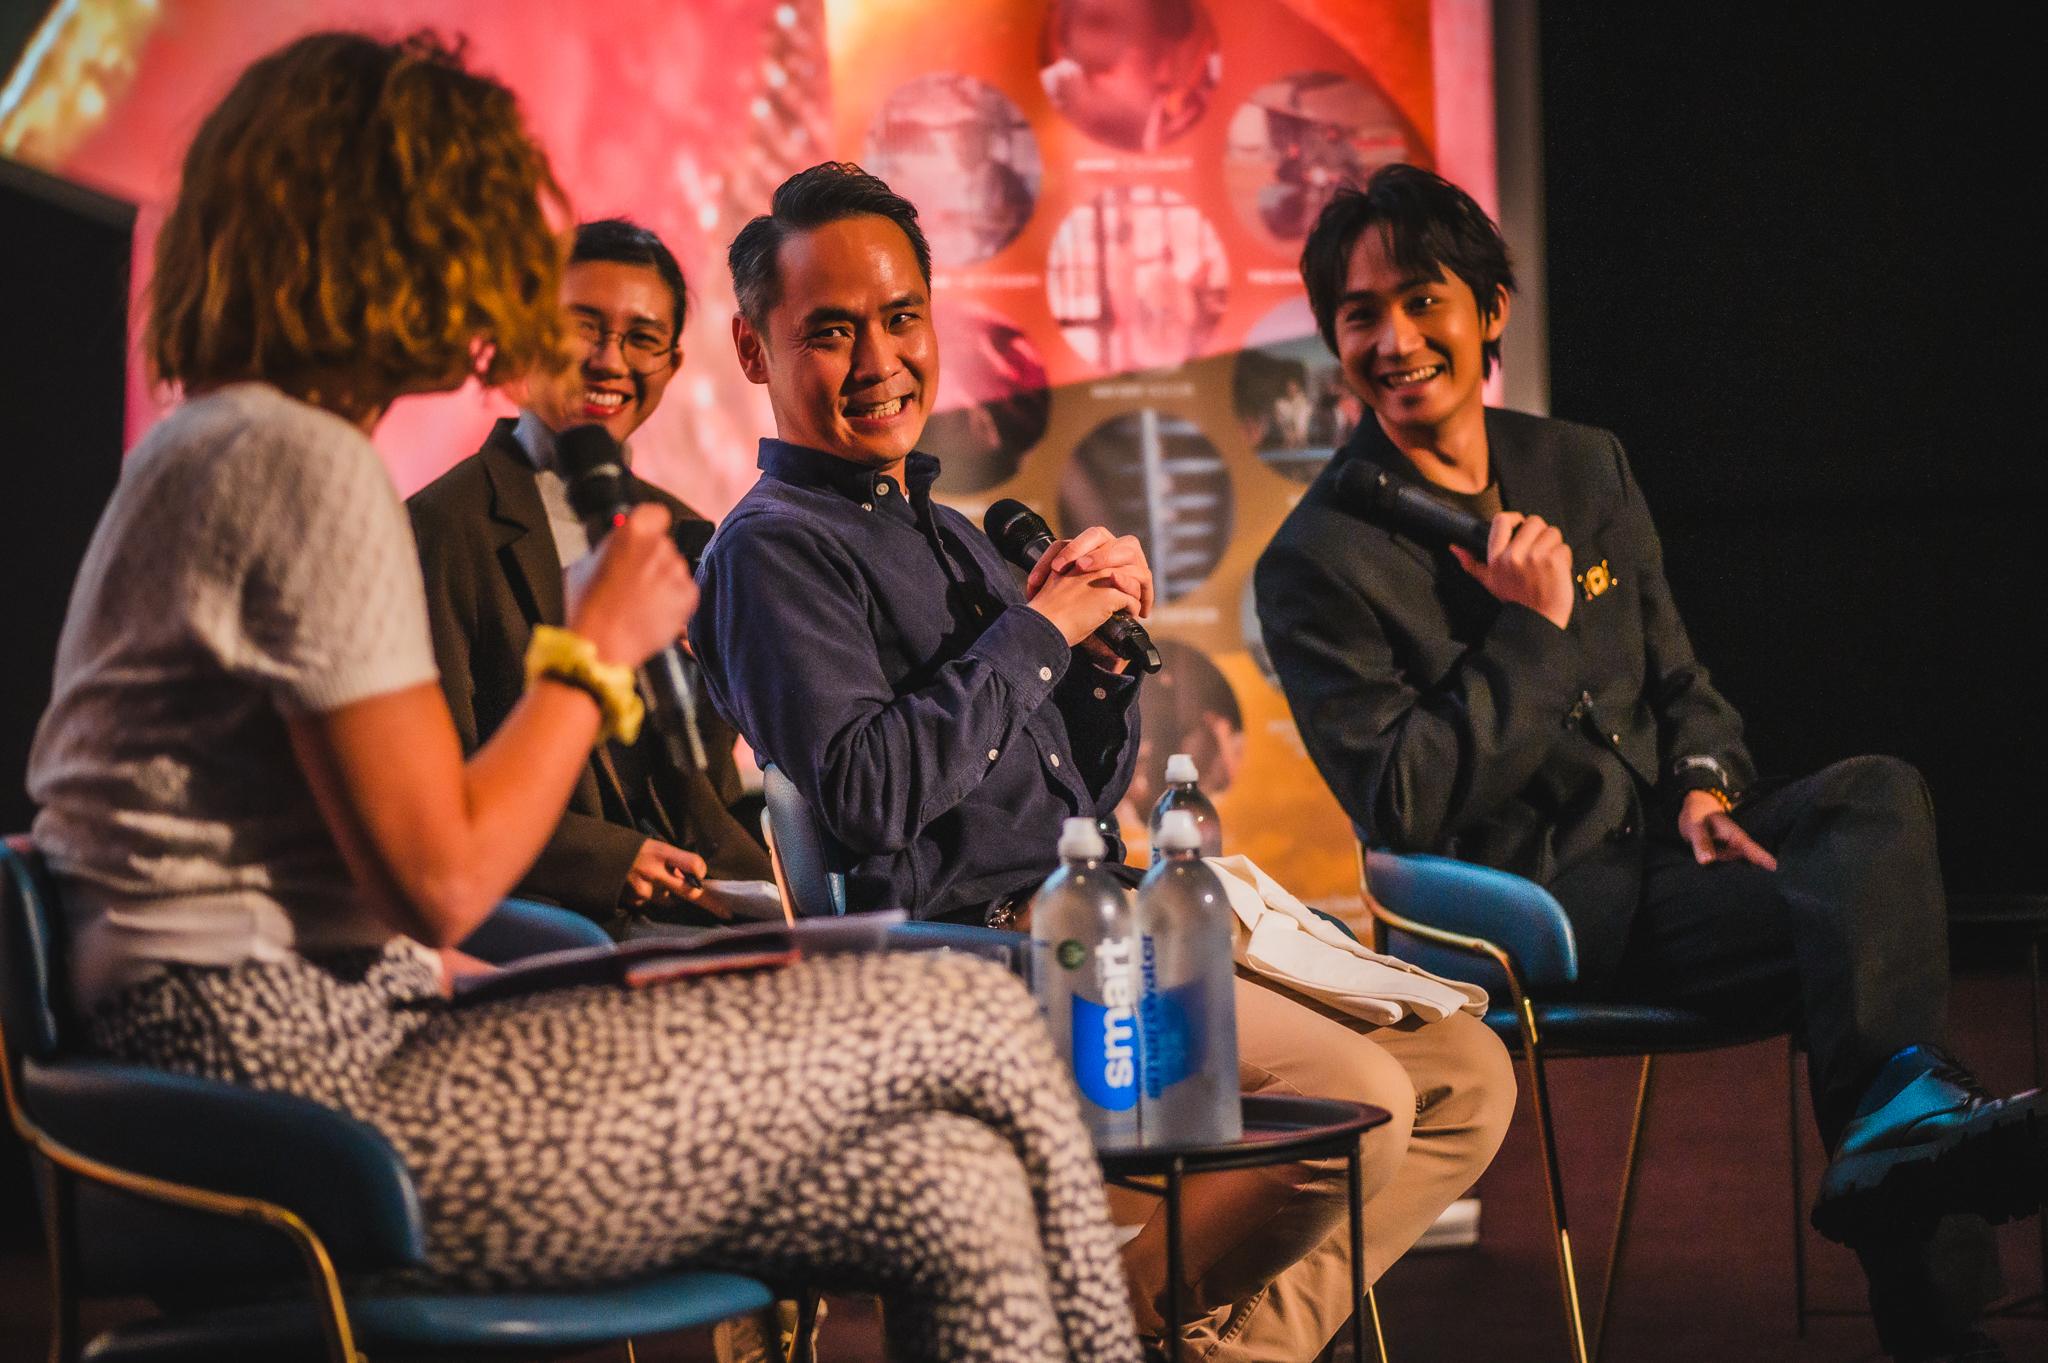 The Hong Kong Economic and Trade Office, London and Create Hong Kong supported the London East Asia Film Festival from October 18 to 29 (London time), showcasing a selection of seven Hong Kong films. Photo shows actor Ng Siu-hin (first right) and director Au Cheuk-man at the Question and Answer session after the screening of "Stand Up Story".